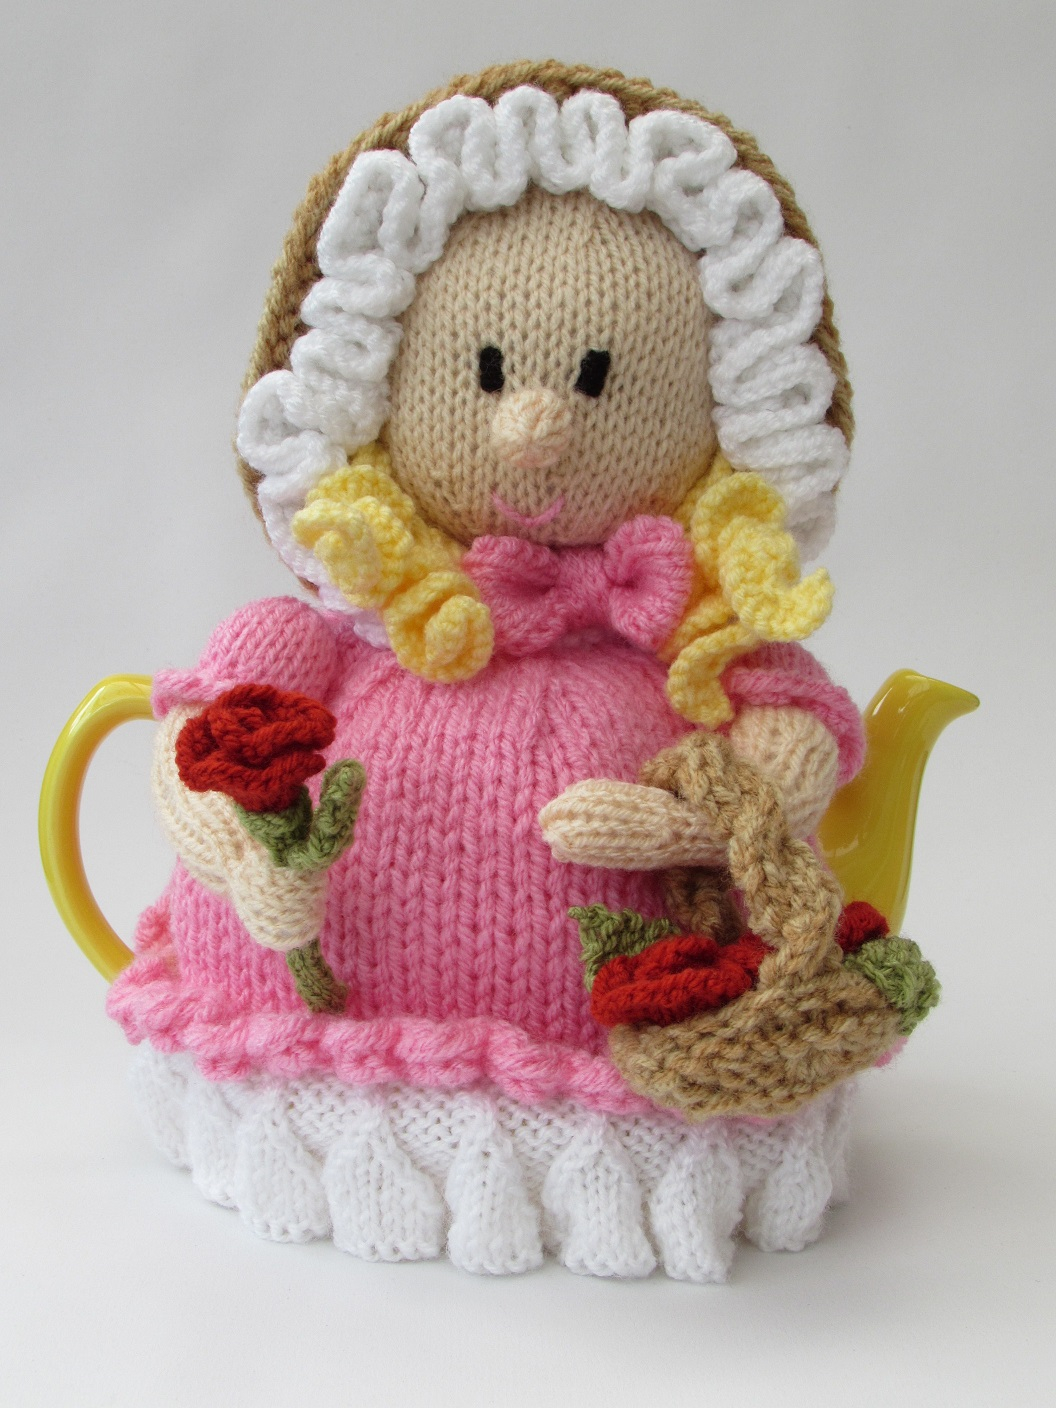 Victorian Knitting Patterns Free Tea Cosy Knitting Patterns From Tea Cosy Folk Learn How To Knit Our